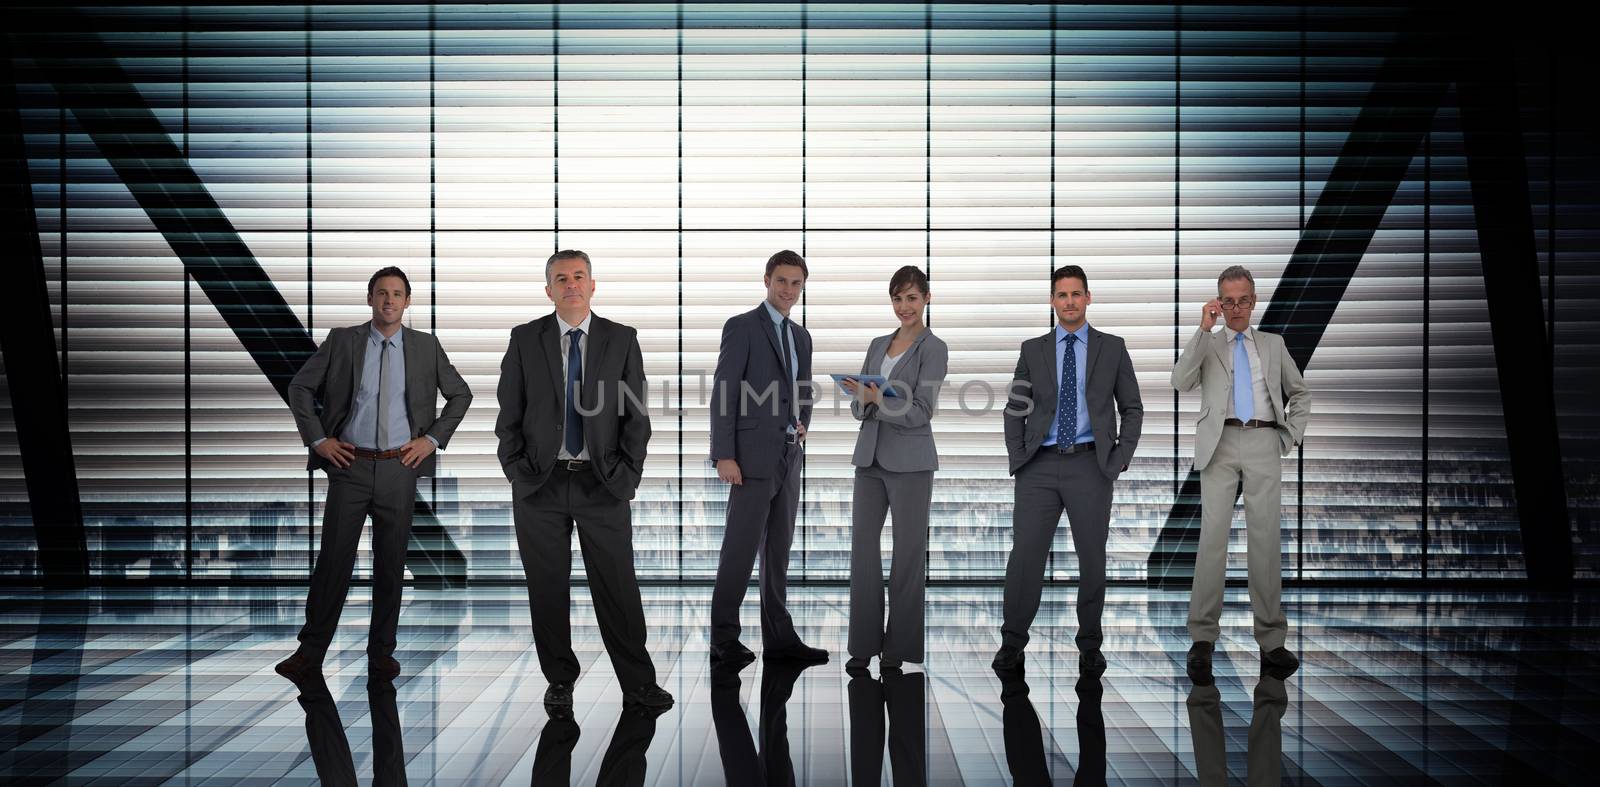 Composite image of business people by Wavebreakmedia